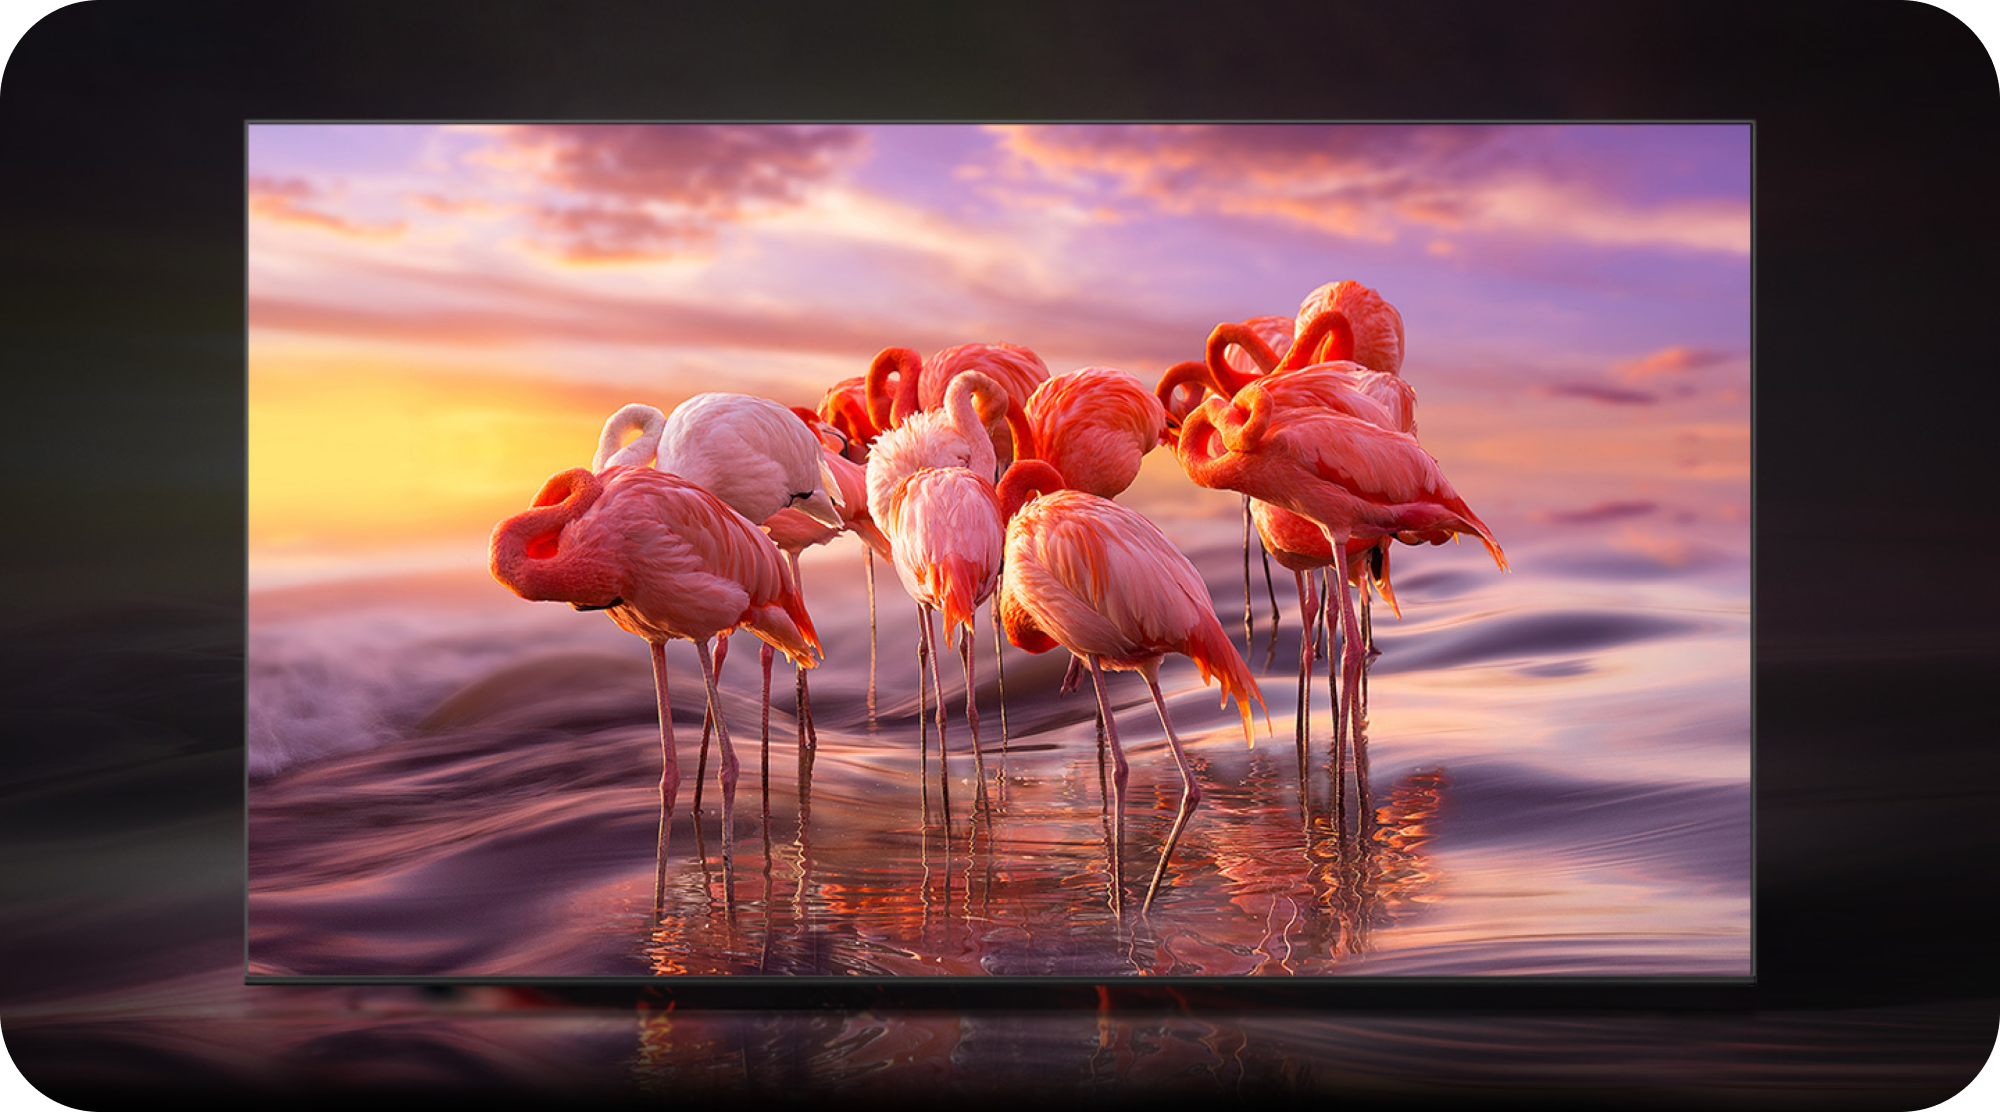 Samsung OLED with picture of flamingos in the TV screen